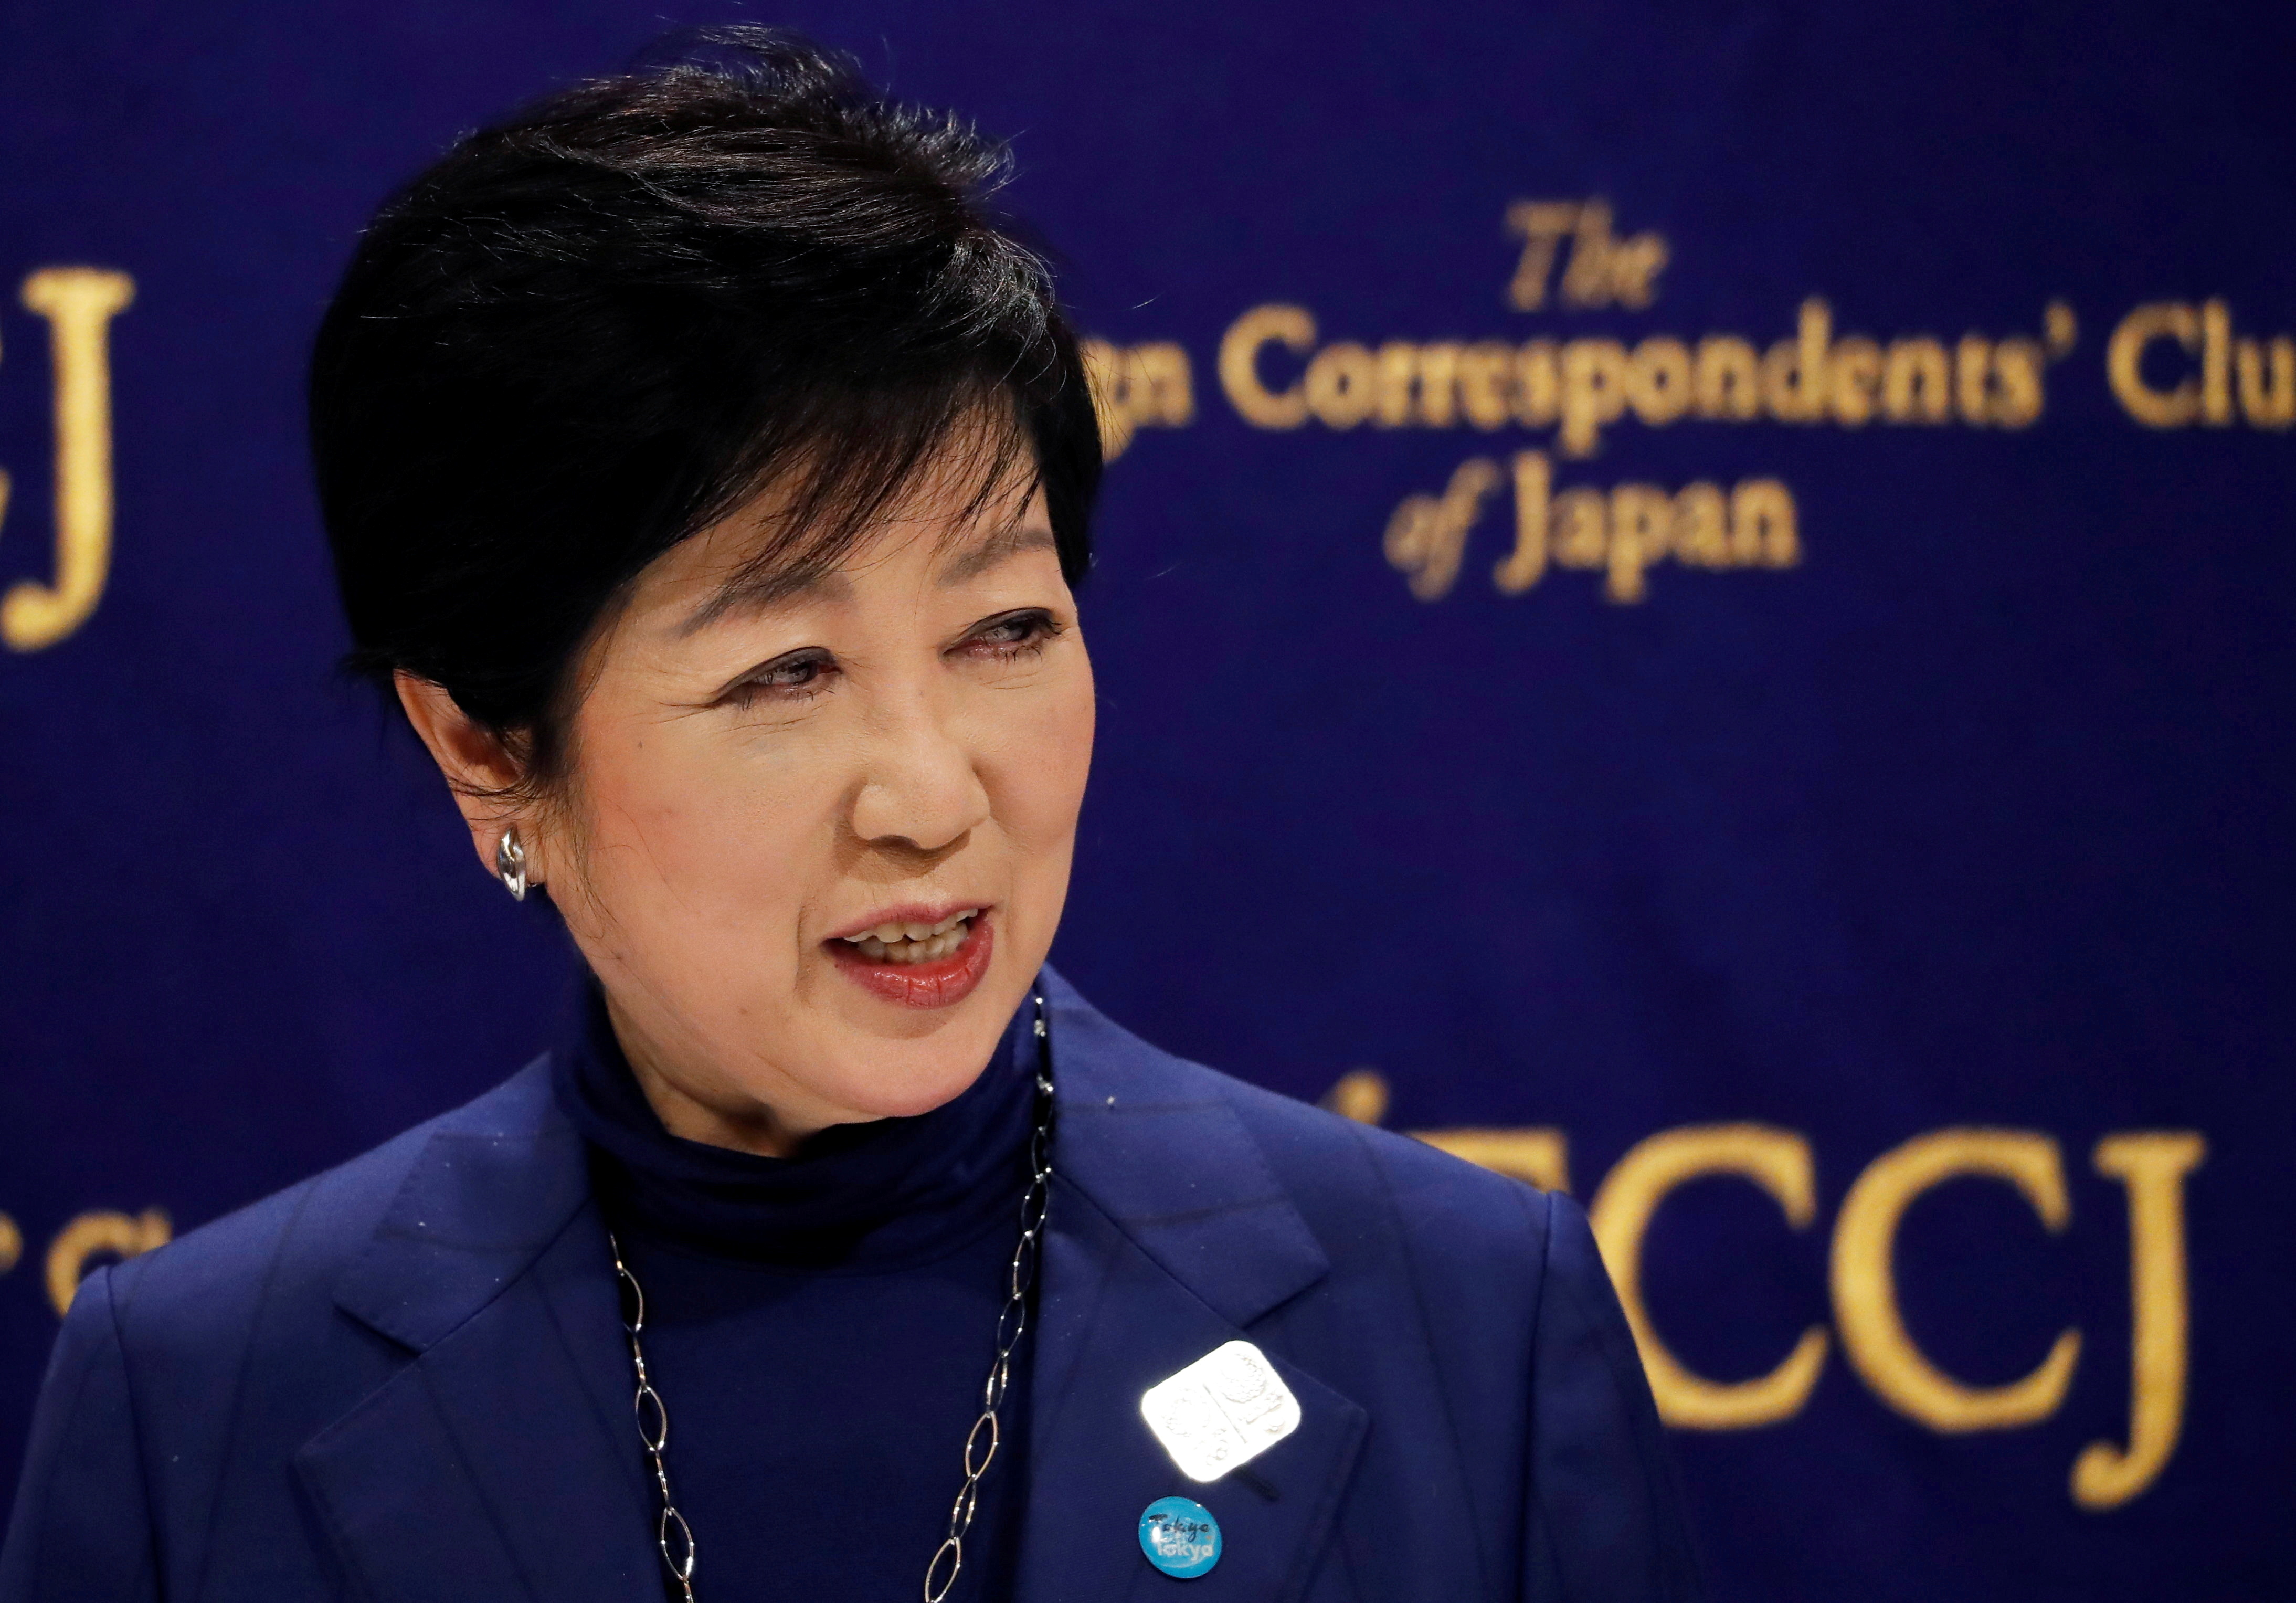 Tokyo Governor Yuriko Koike attends a news conference, amid the coronavirus disease (COVID-19) outbreak, in Tokyo